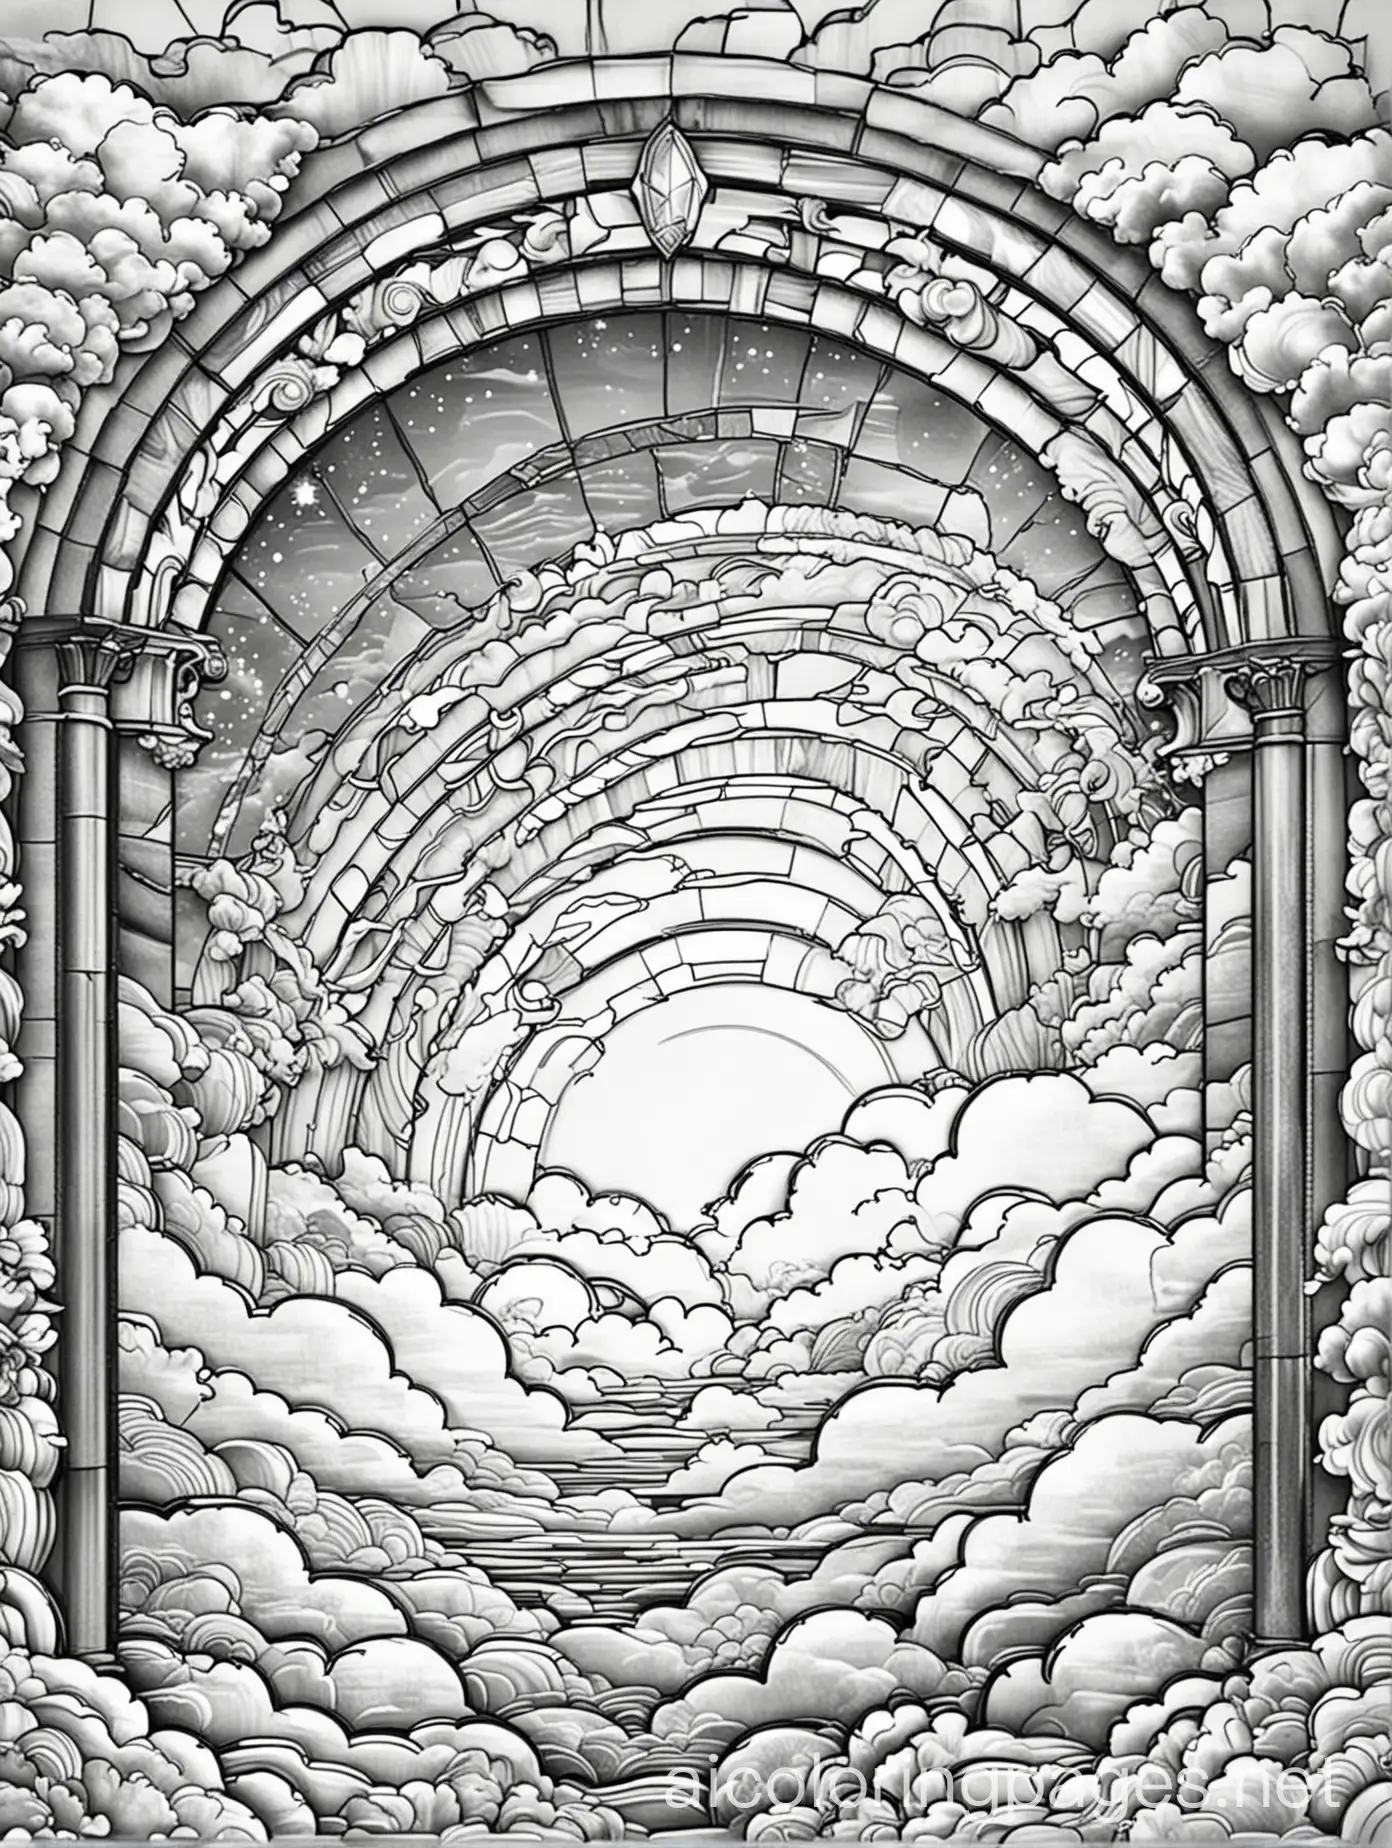 Line art black and white stained glass window of a rainbow arching across the sky with fluffy clouds, Coloring Page, black and white, line art, white background, Simplicity, Ample White Space. The background of the coloring page is plain white to make it easy for young children to color within the lines. The outlines of all the subjects are easy to distinguish, making it simple for kids to color without too much difficulty